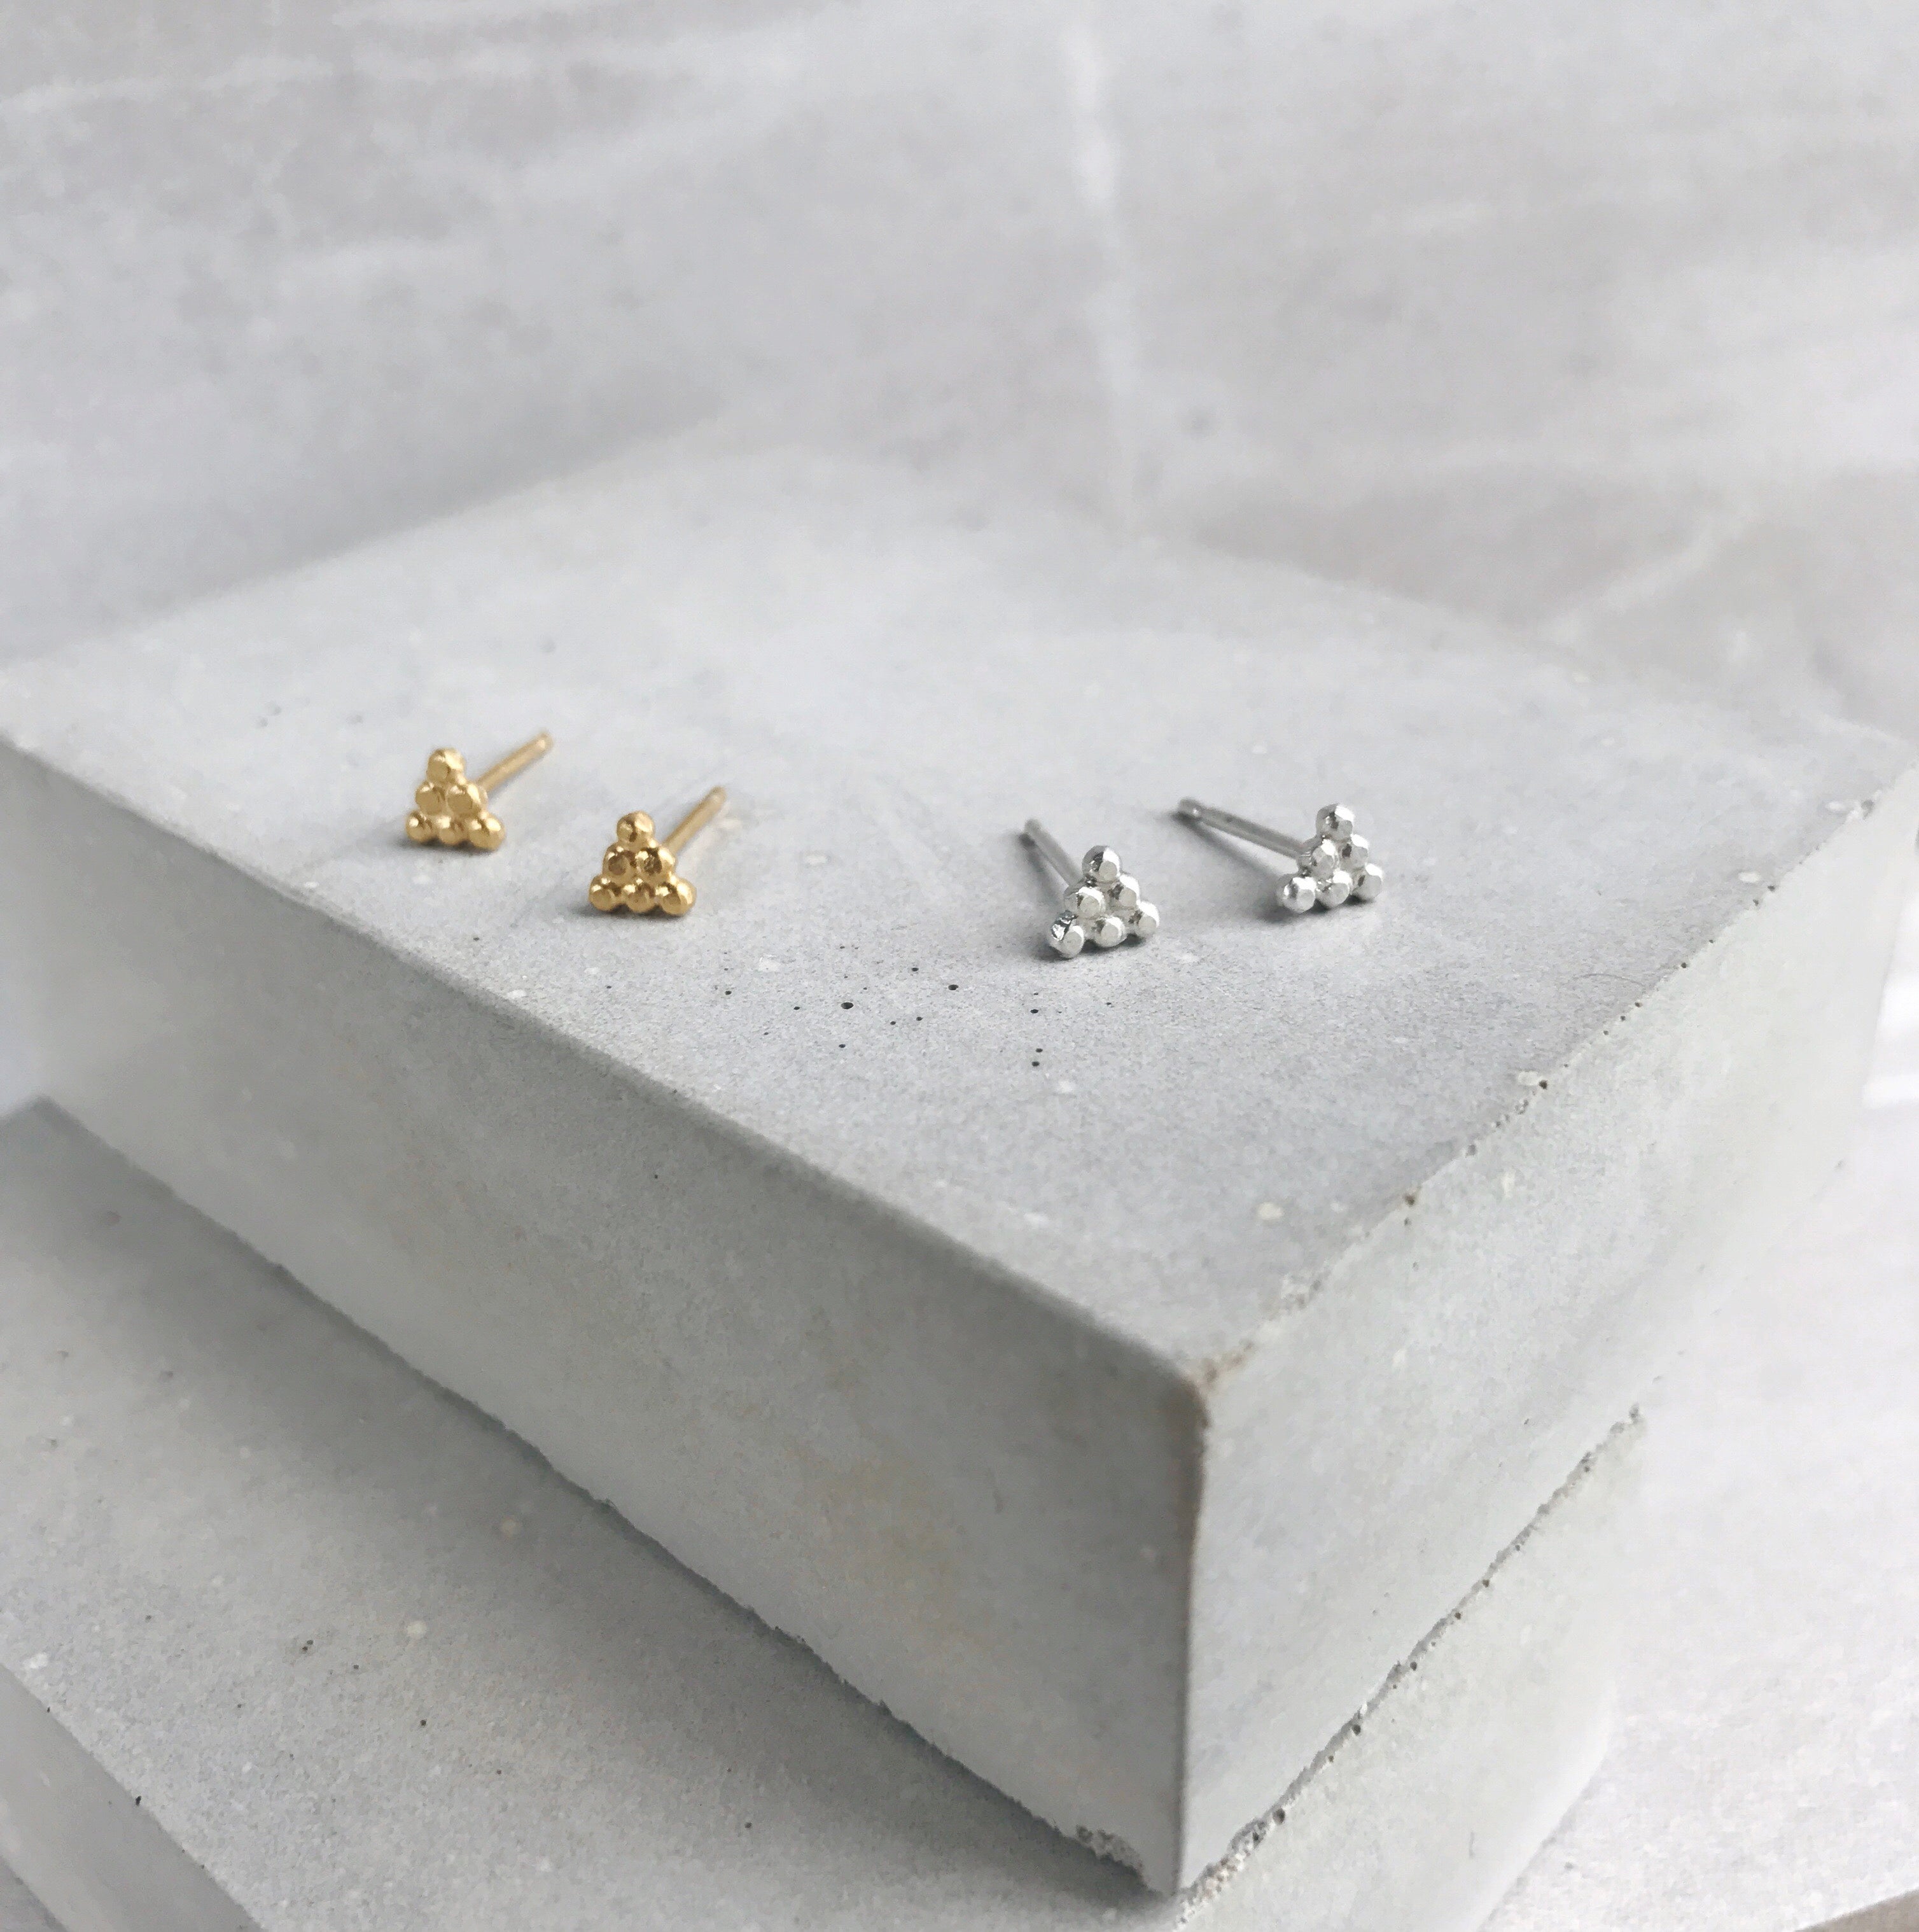 tiny hexagon pyramid ear-stud earrings in polished sterling silver —  circlesmith